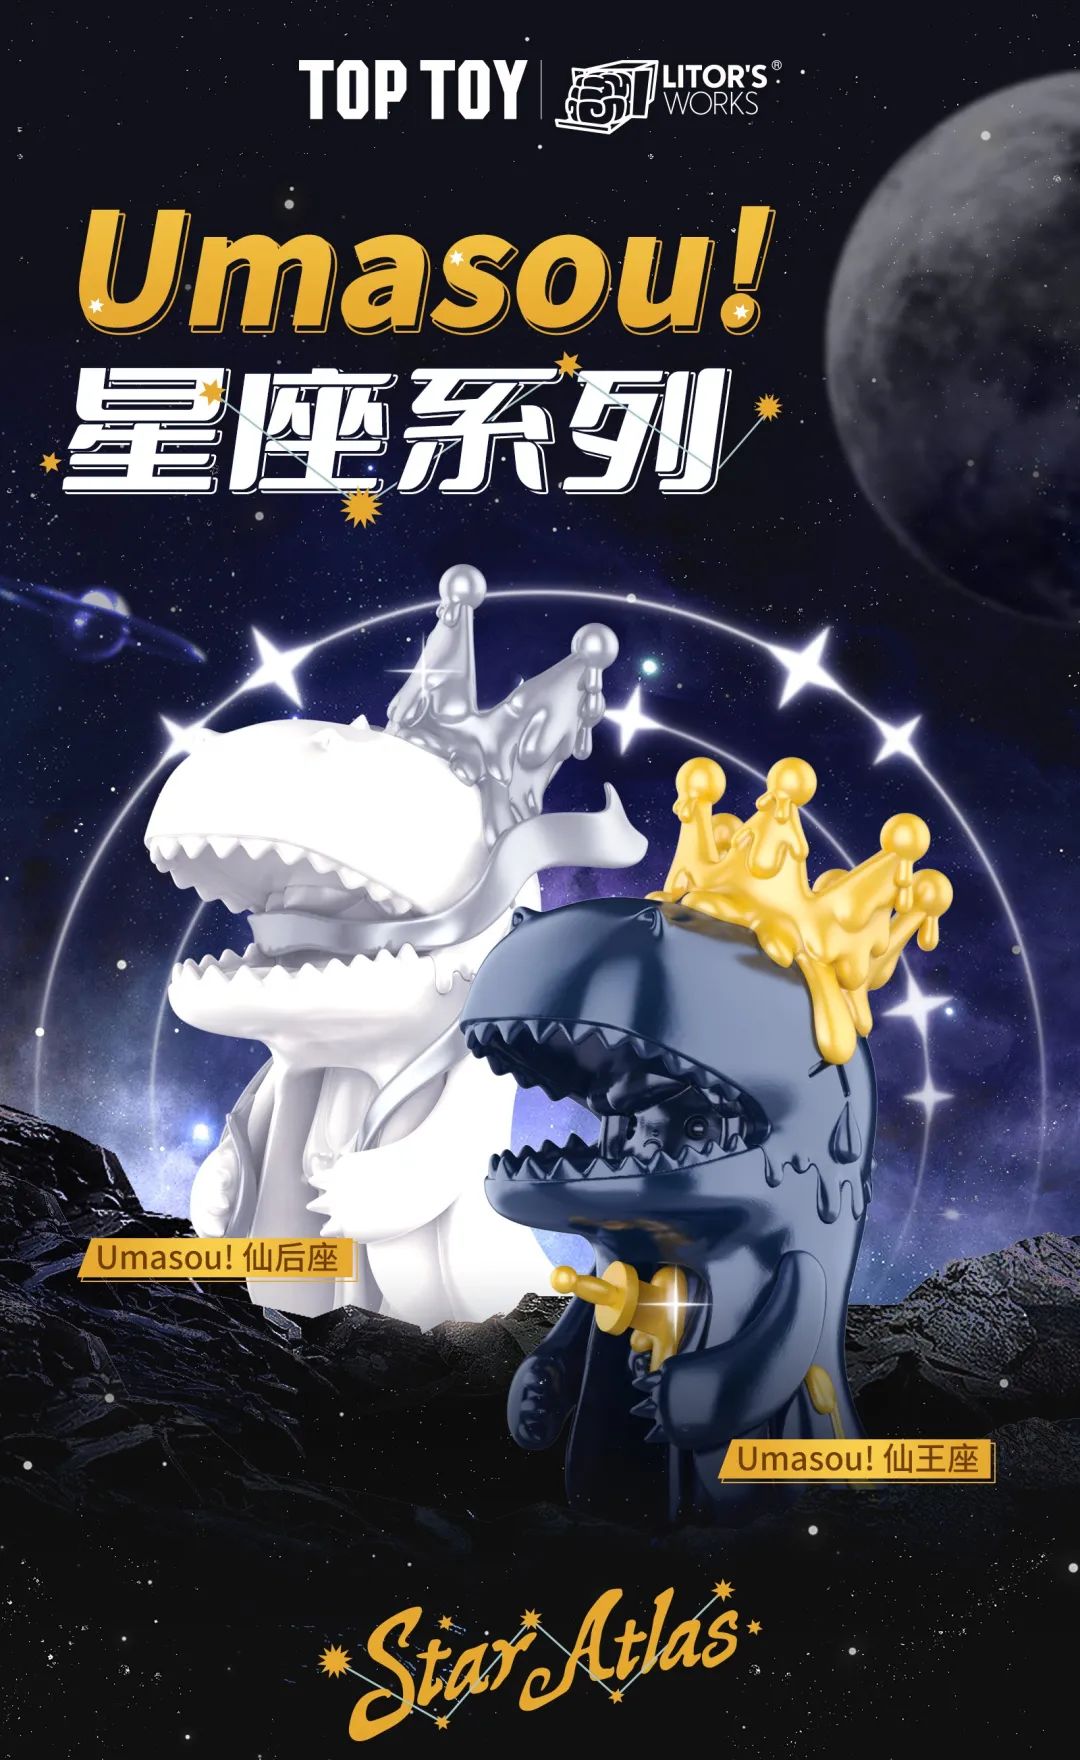 Toy dinosaur with crown from Umasou! Star Atlas, vinyl, 15cm, limited to 150pcs each.